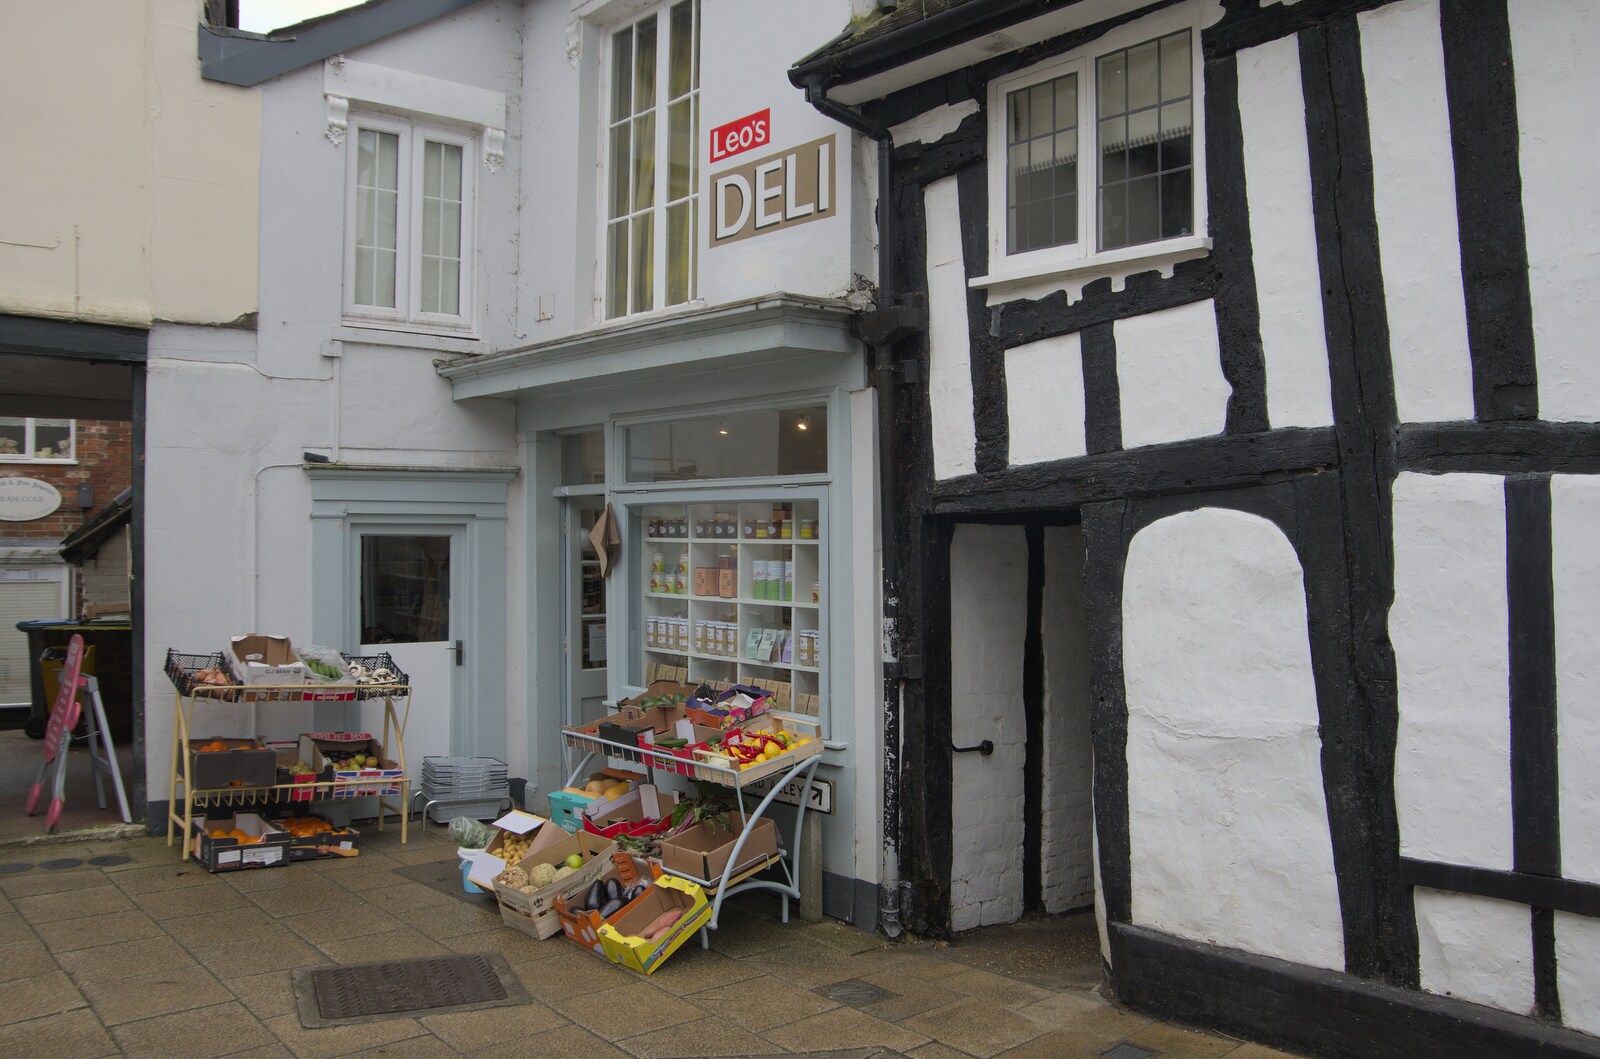 Leo's Deli, by Queen's Head Alley from Framlingham, Aldeburgh and the USAAF Heritage Trust, Hoxne, Suffolk - 14th February 2024 